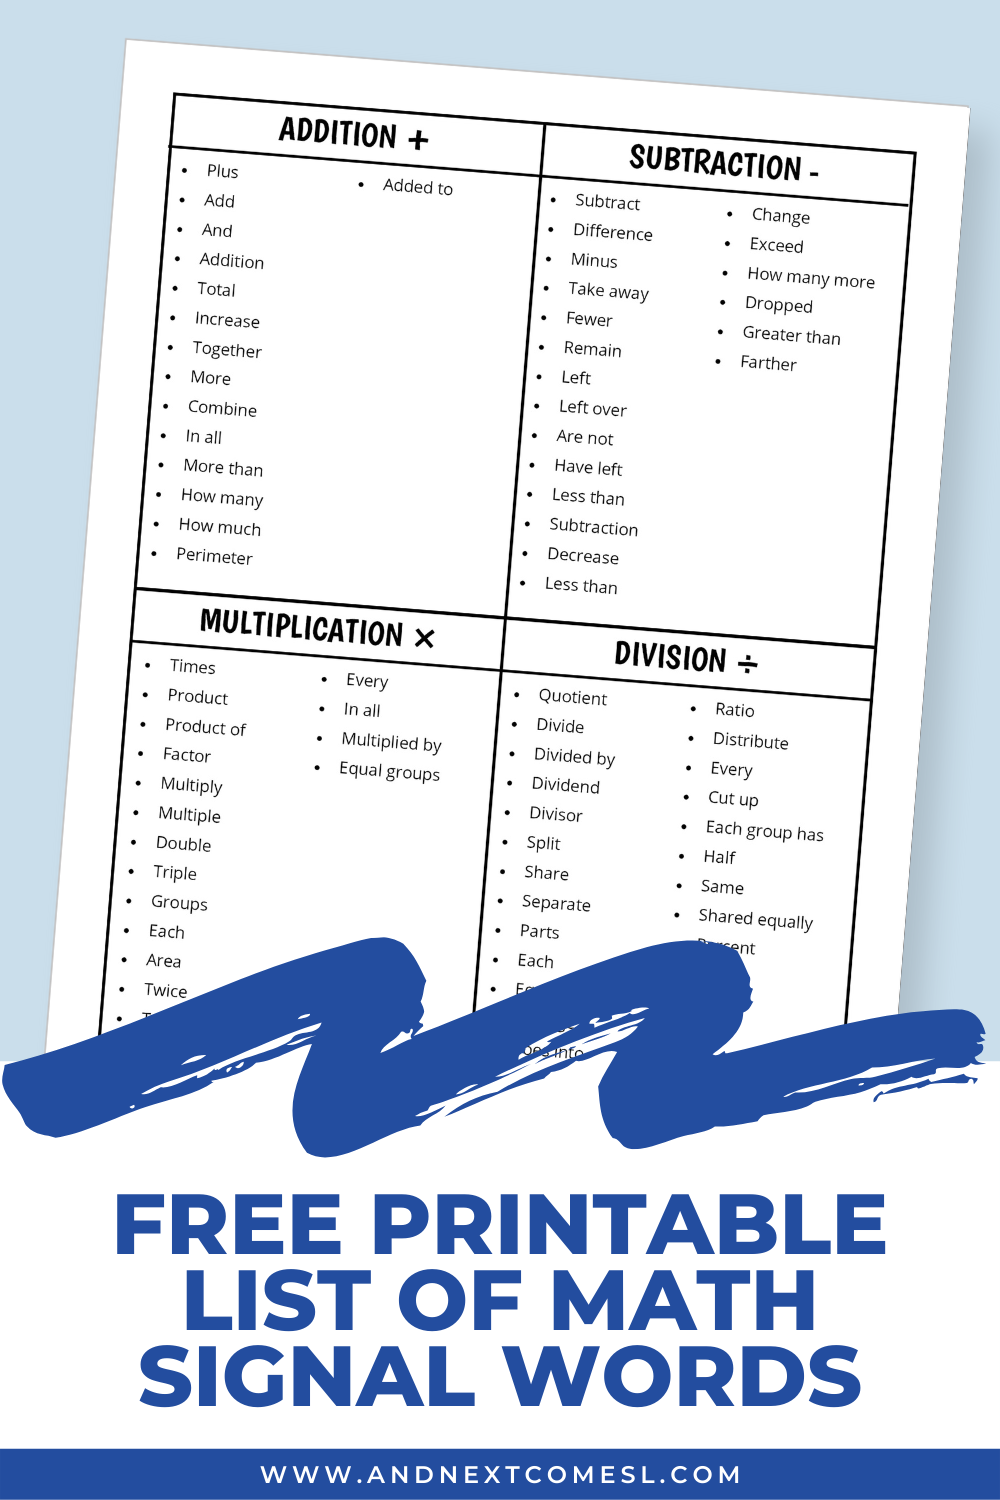 Free printable list of math signal words that will improve comprehension of word problems